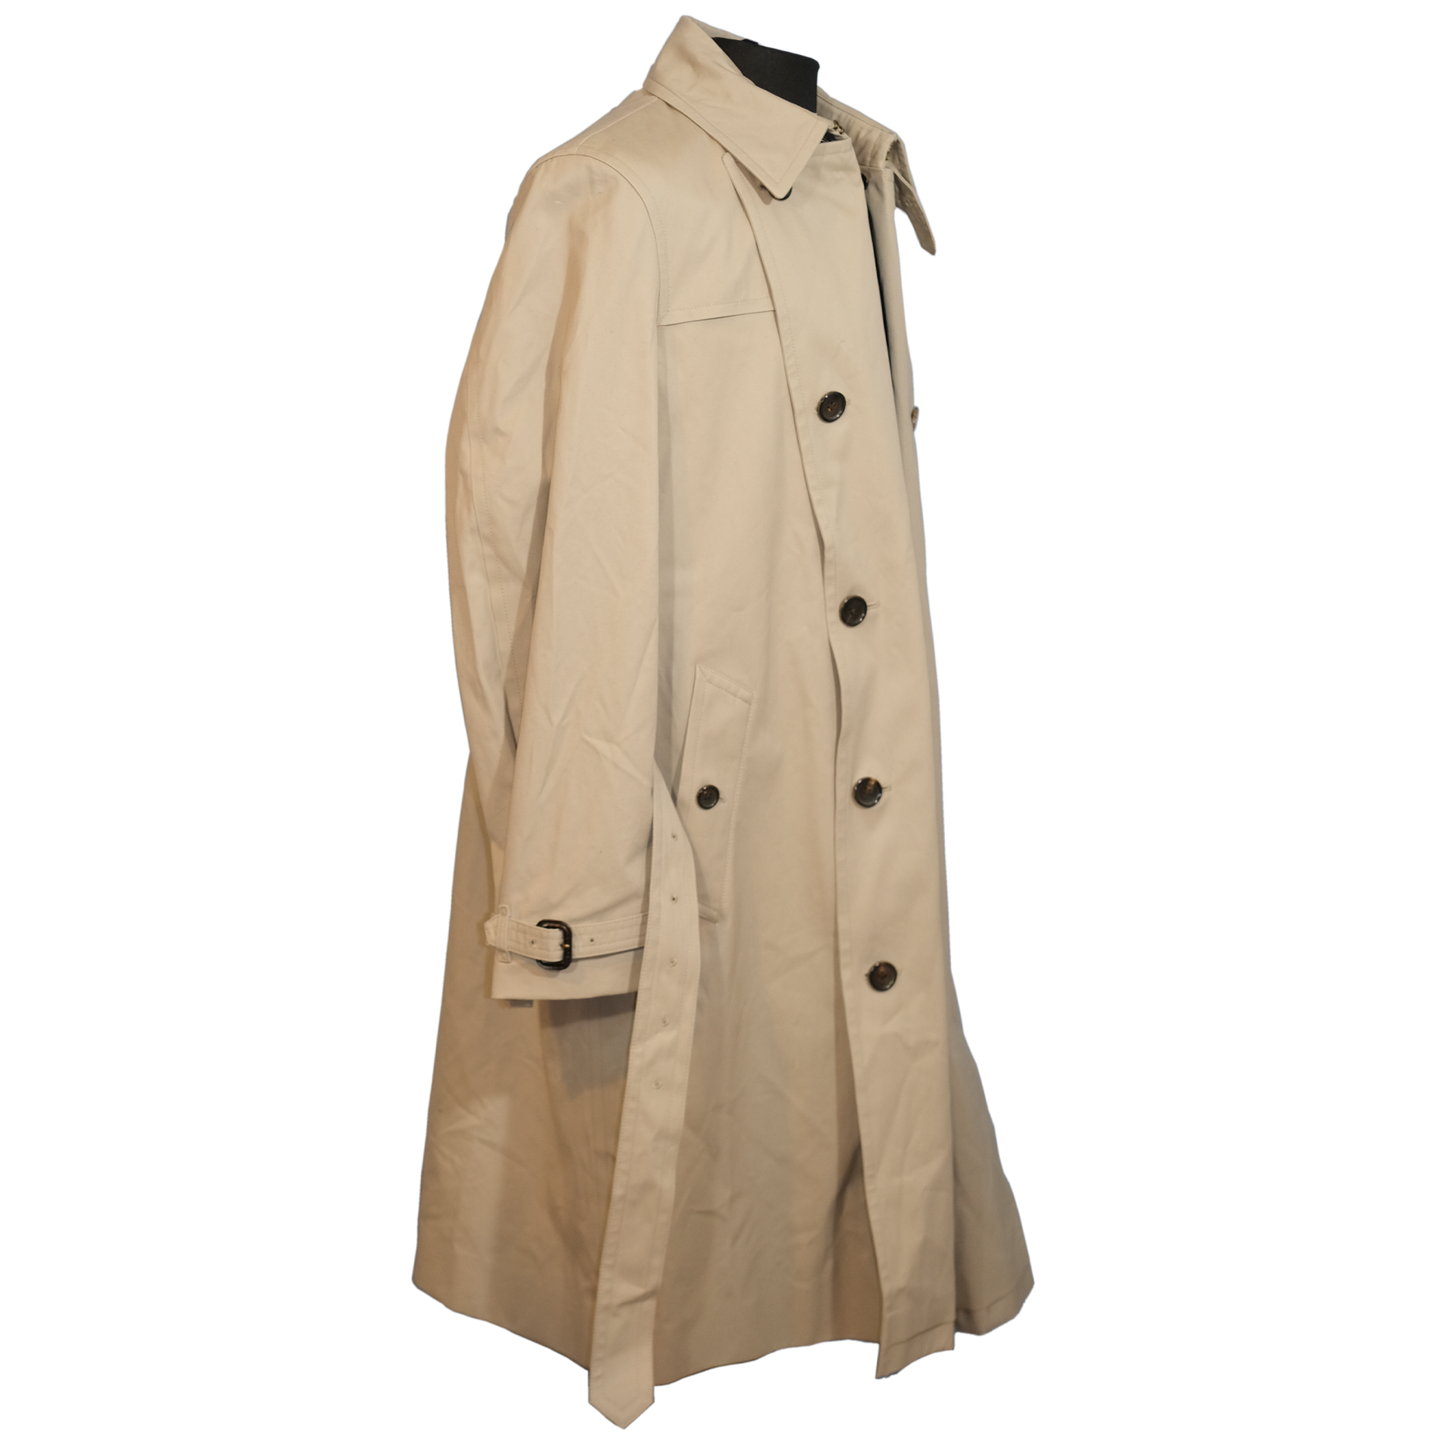 Pre-owned Men's Brooks Brothers Trench Coat Size 44R